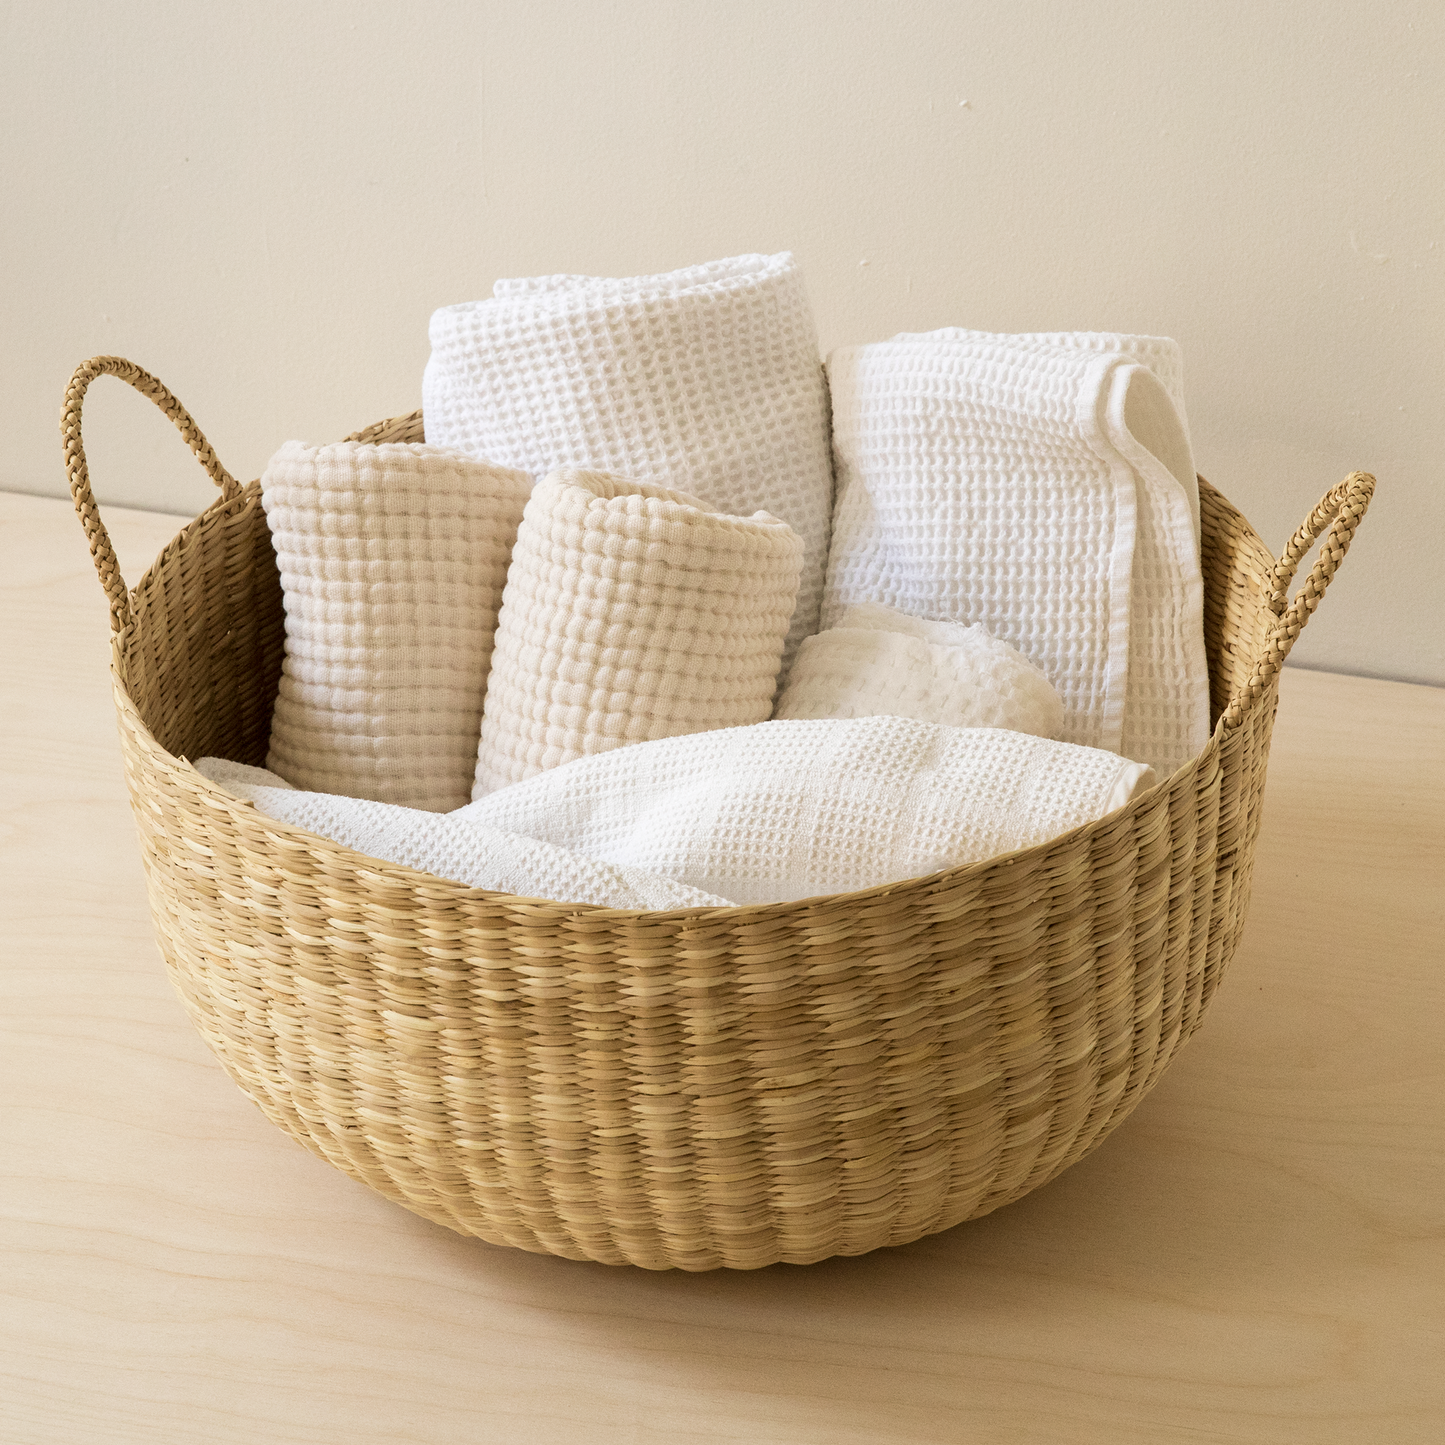 Intiearth junco floor basket for storage and home decor